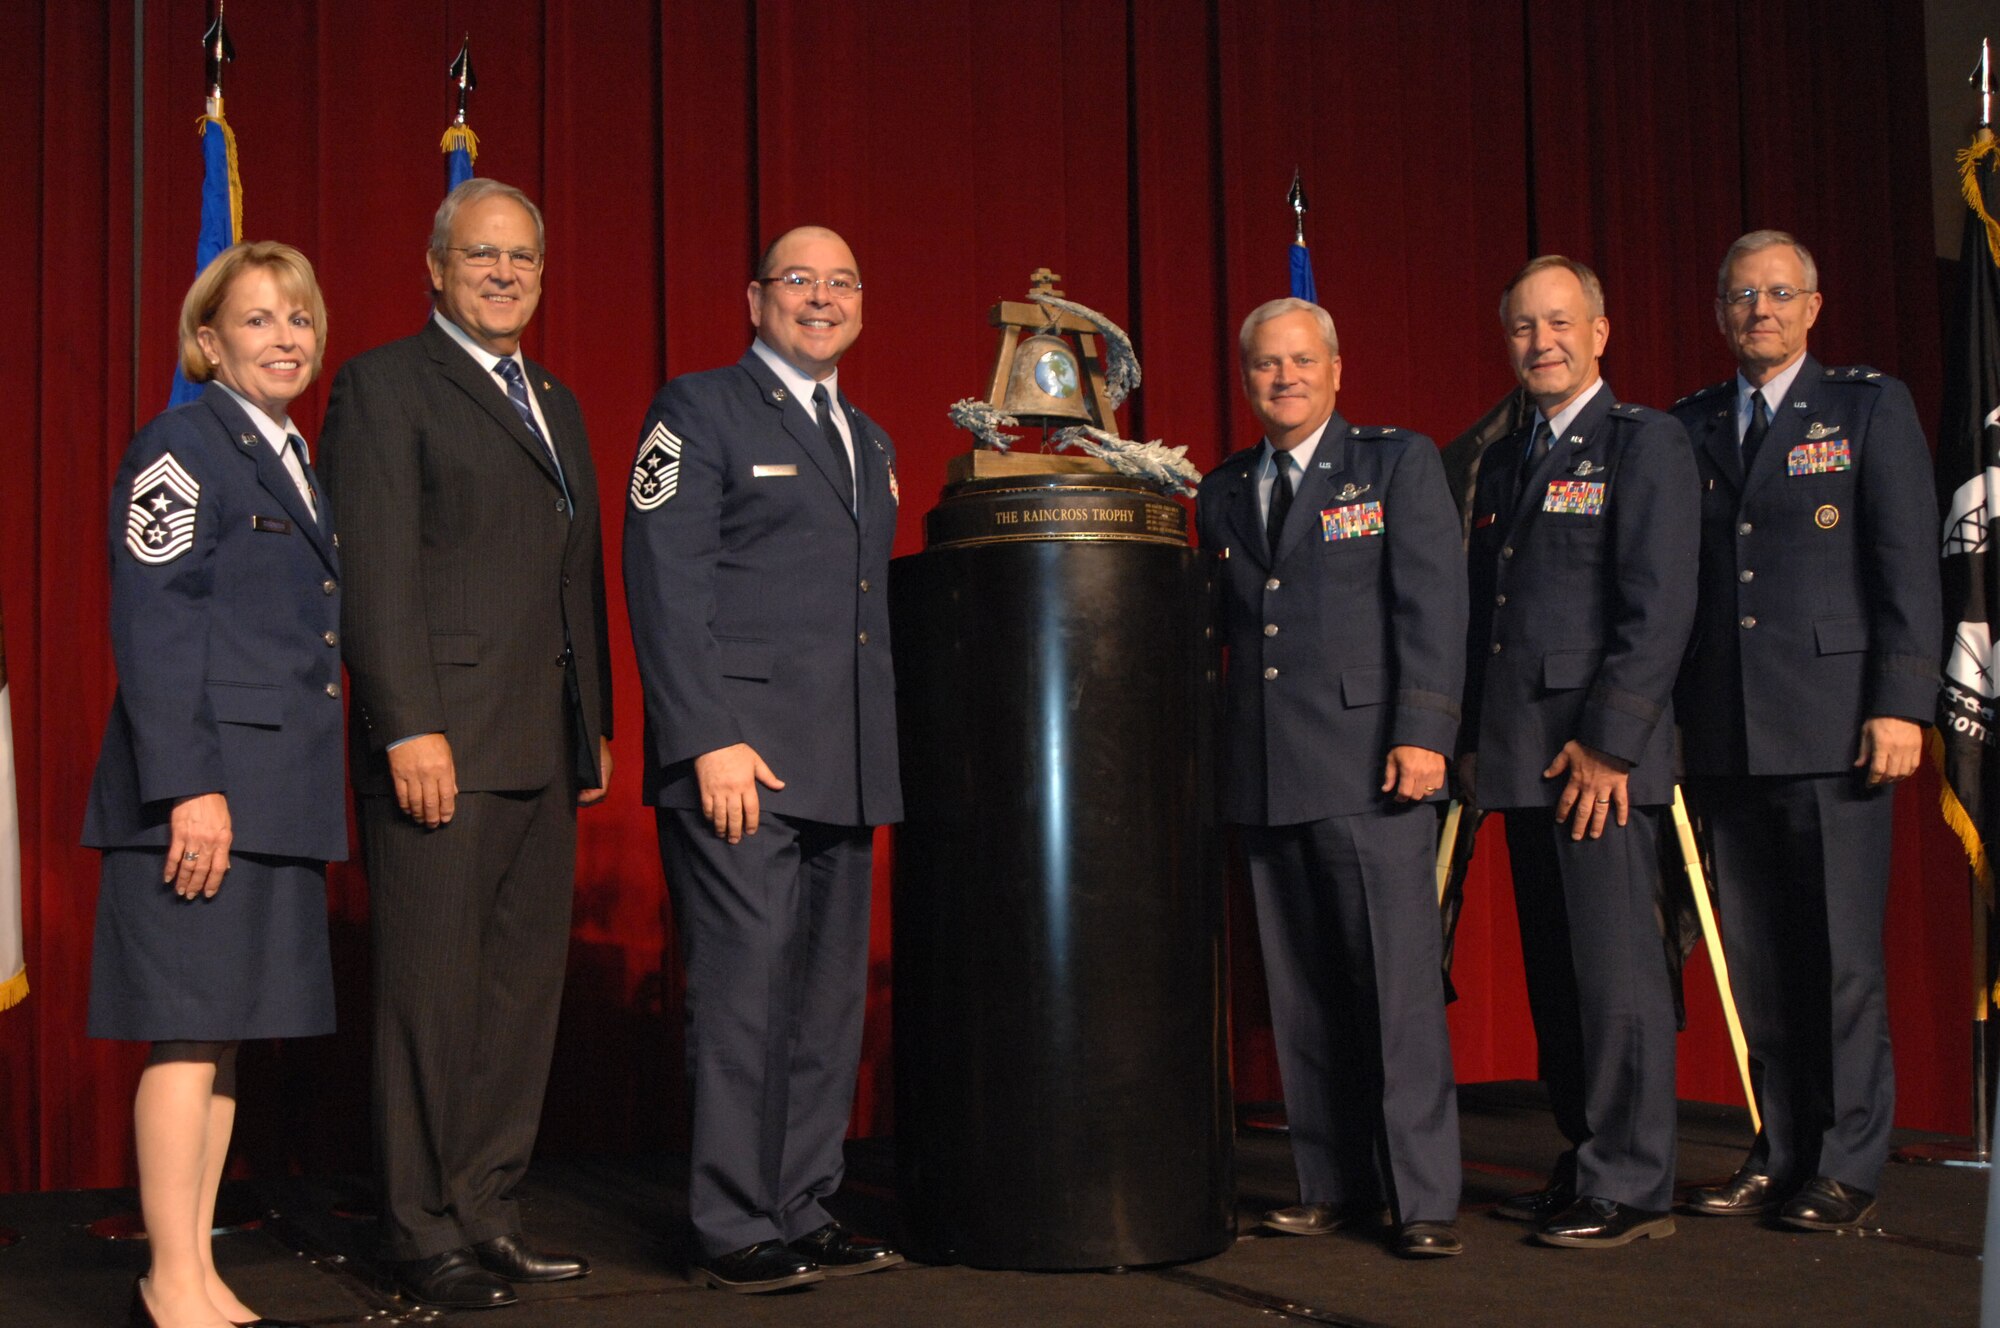 From left to right, Chief Master Sgt. Patricia Thornton, Fourth Air Force Command Chief; Mr. Roger Rupp, Greater Riverside Chambers of Commerce Military Affairs Committee Chairman; Brig. Gen. James Melin, 452nd Air Mobility Wing Commander; Chief Master Sgt. Agustin Huerta, 452nd AMW Command Chief;  Brig. Gen. Eric W. Crabtree, Headquarters Fourth Air Force  Commander; and Maj. Gen. John M. Howlett, Deputy Director, U.S. Strategic Command, pose with the Raincross Trophy after it was awarded to the 452nd AMW during the 11th Annual Raincross Trophy Dinner held July 23, 2009, at the Riverside Convention Center, Riverside, Calif.. The dinner is hosted by the Greater Riverside Chambers of Commerce Military Affairs Committee to honor and recognize the 11 wings and two groups in 4th Air Force.  (U.S. Air Force photo/ Senior Master Sergeant Kim Allain)  (released)